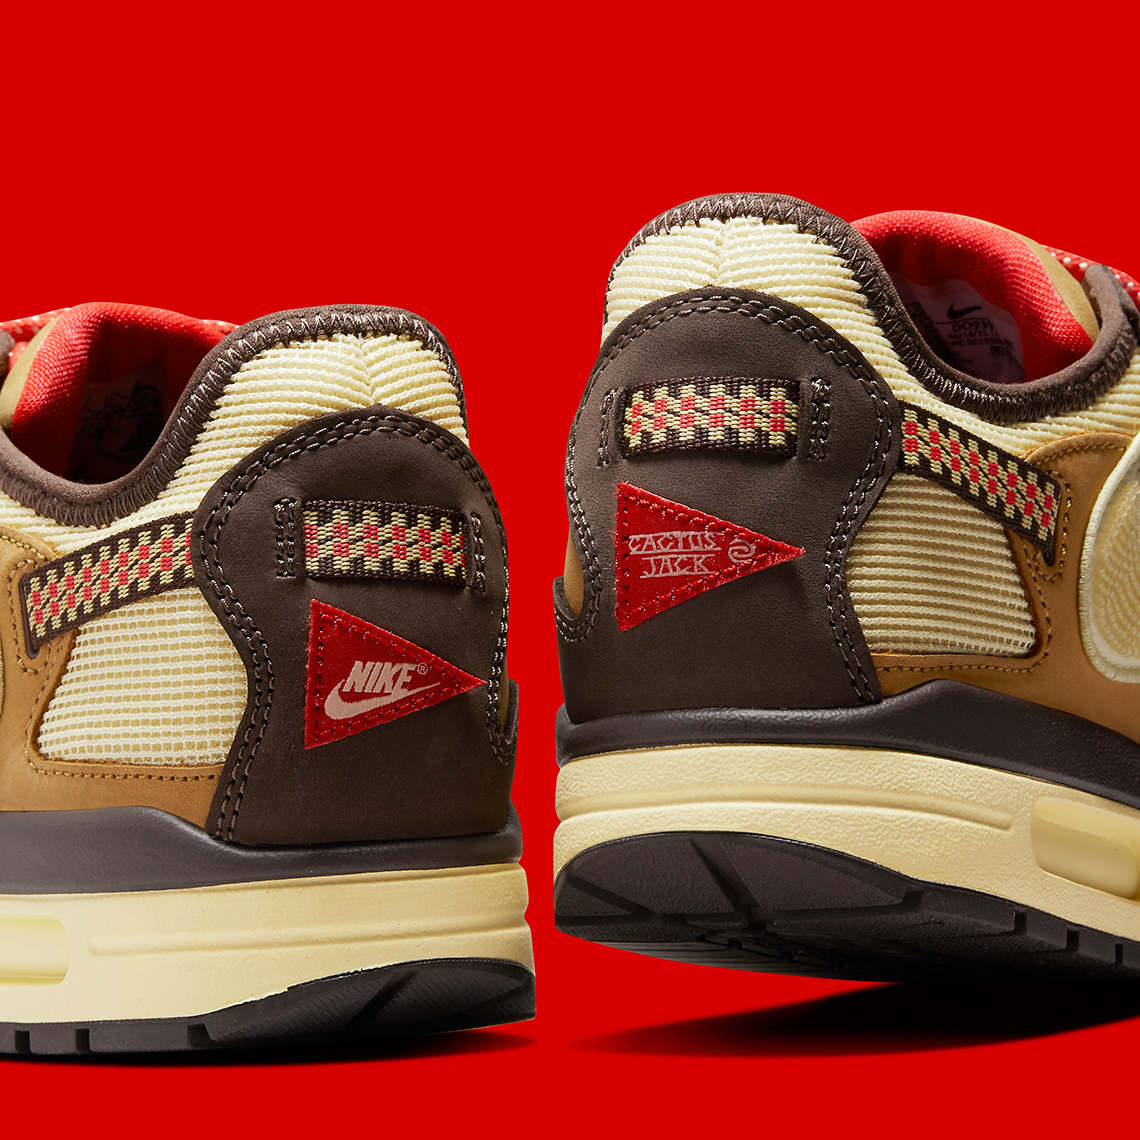 Travis Scott Nike Air Max 1 Official Images Do9392 200 7